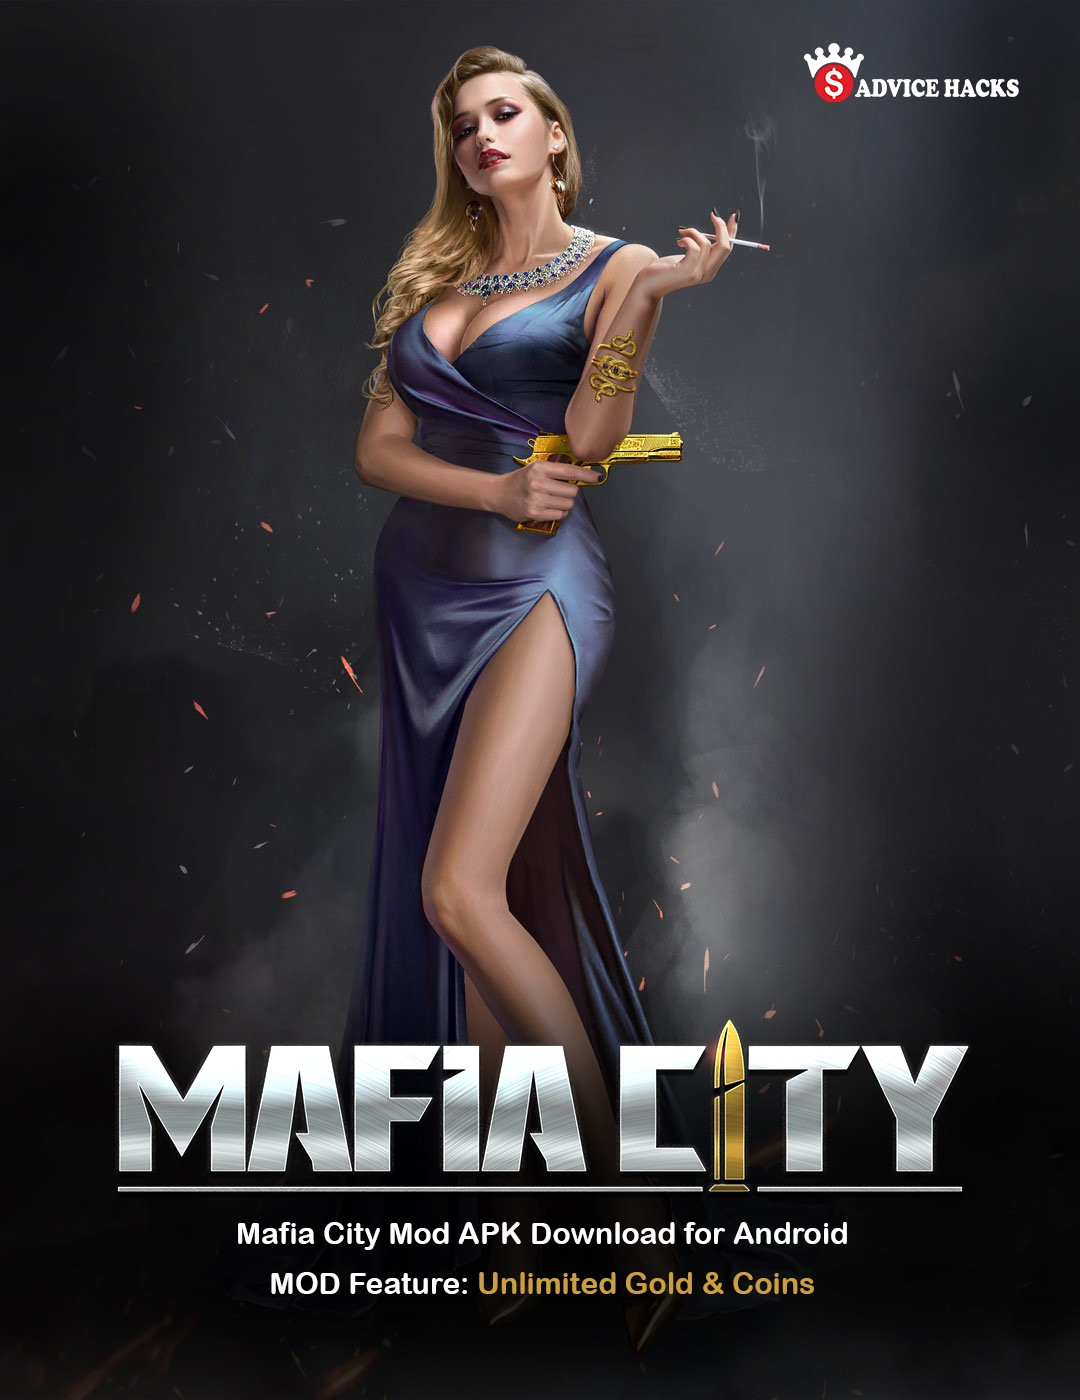 Mafia City Mod APK Download for Android